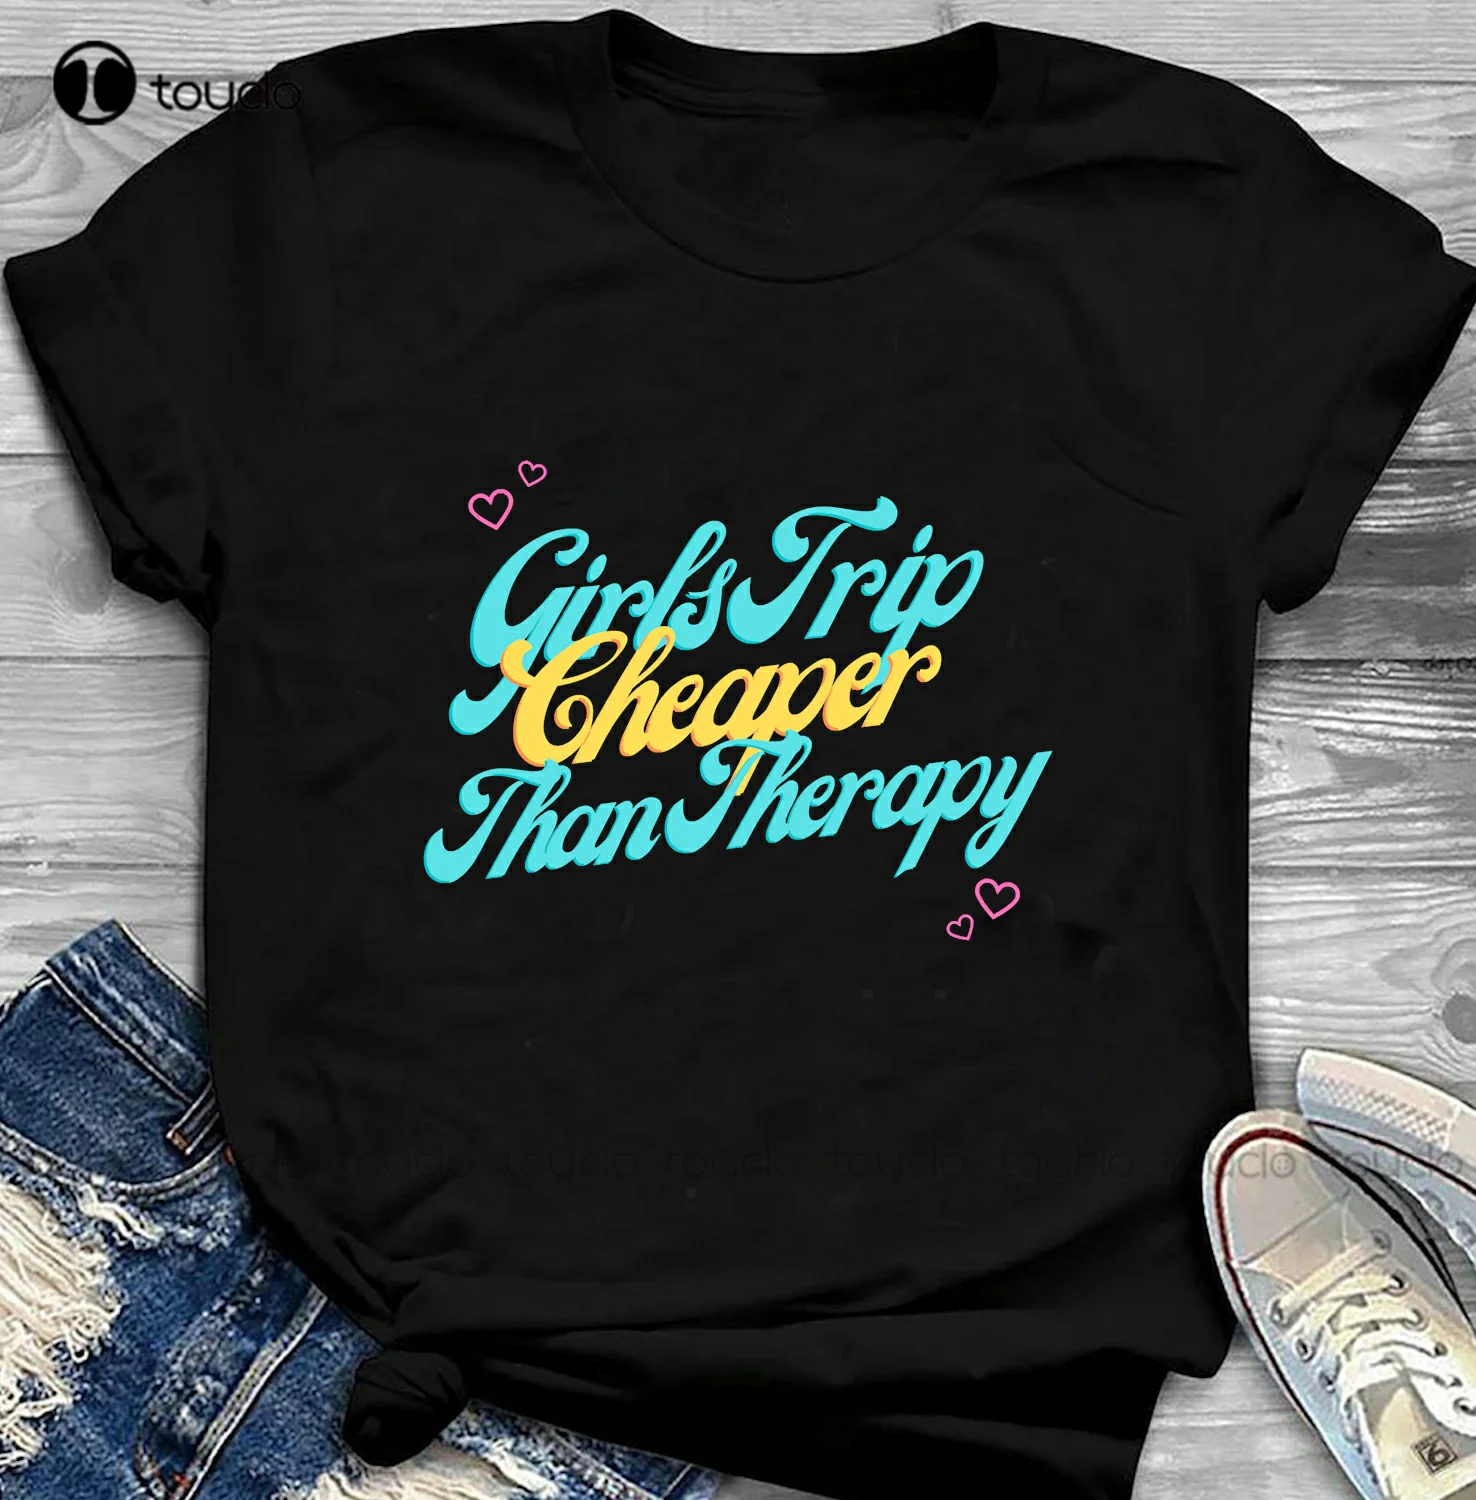 New Girls Trip Cheaper Than Therapy Relaxed Fit T-Shirt Boys White T Shirts Cotton Tee Xs-5Xl Unisex Fashion Funny Tshirt